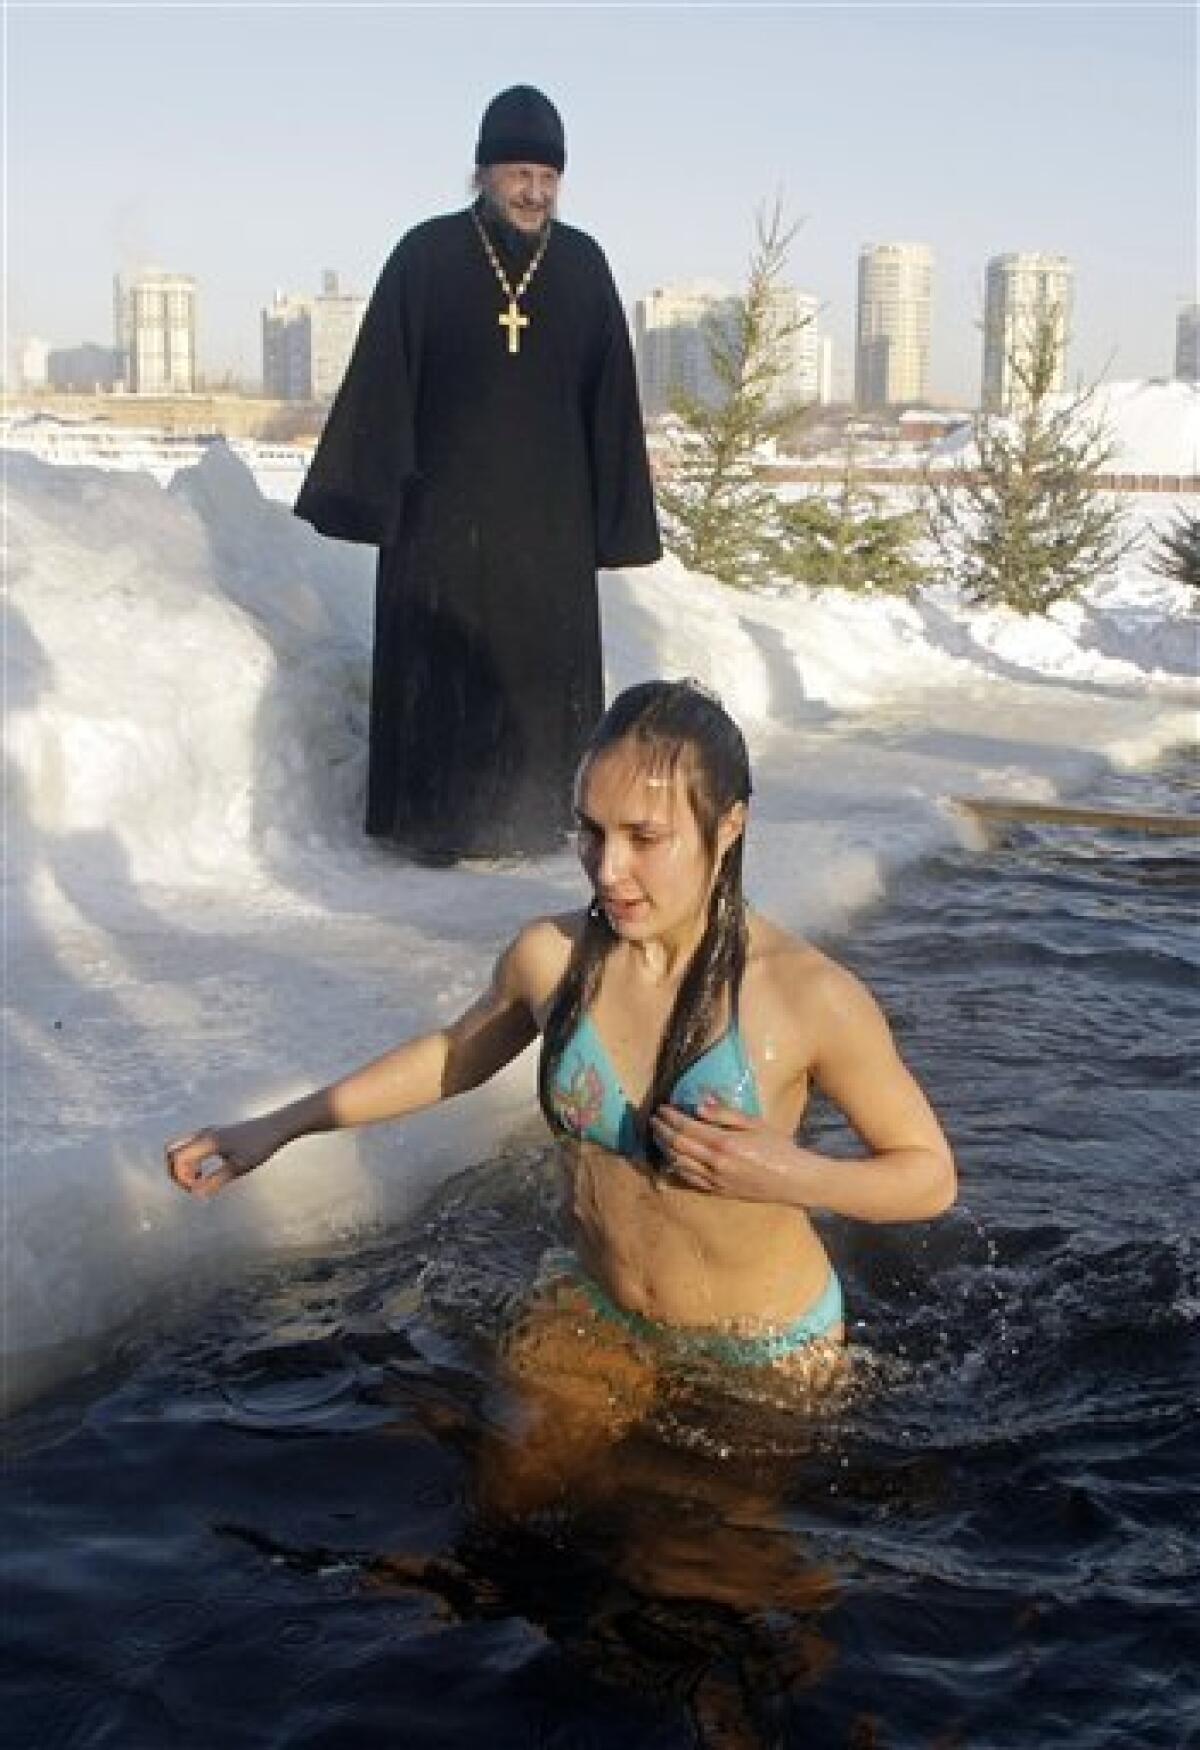 A girl emerges from cold water after plunging into icy pond to mark the upcoming Epiphany in the northwestern Moscow, Monday, Jan. 18, 2010. Thousands of Russian Orthodox Church followers plunged Monday into icy rivers and ponds across the country to mark the upcoming Epiphany, cleansing themselves with water deemed holy for the day. Water that is blessed by a cleric on Epiphany is considered holy and pure until next year's celebration, and is believed to have special powers of protection and healing. The Russian Orthodox Church follows the old Julian calendar, according to which Epiphany falls on Jan. 19. Moscow temperatures on Monday morning dropped to -20 C (-4 F). (AP Photo/Mikhail Metzel) — AP